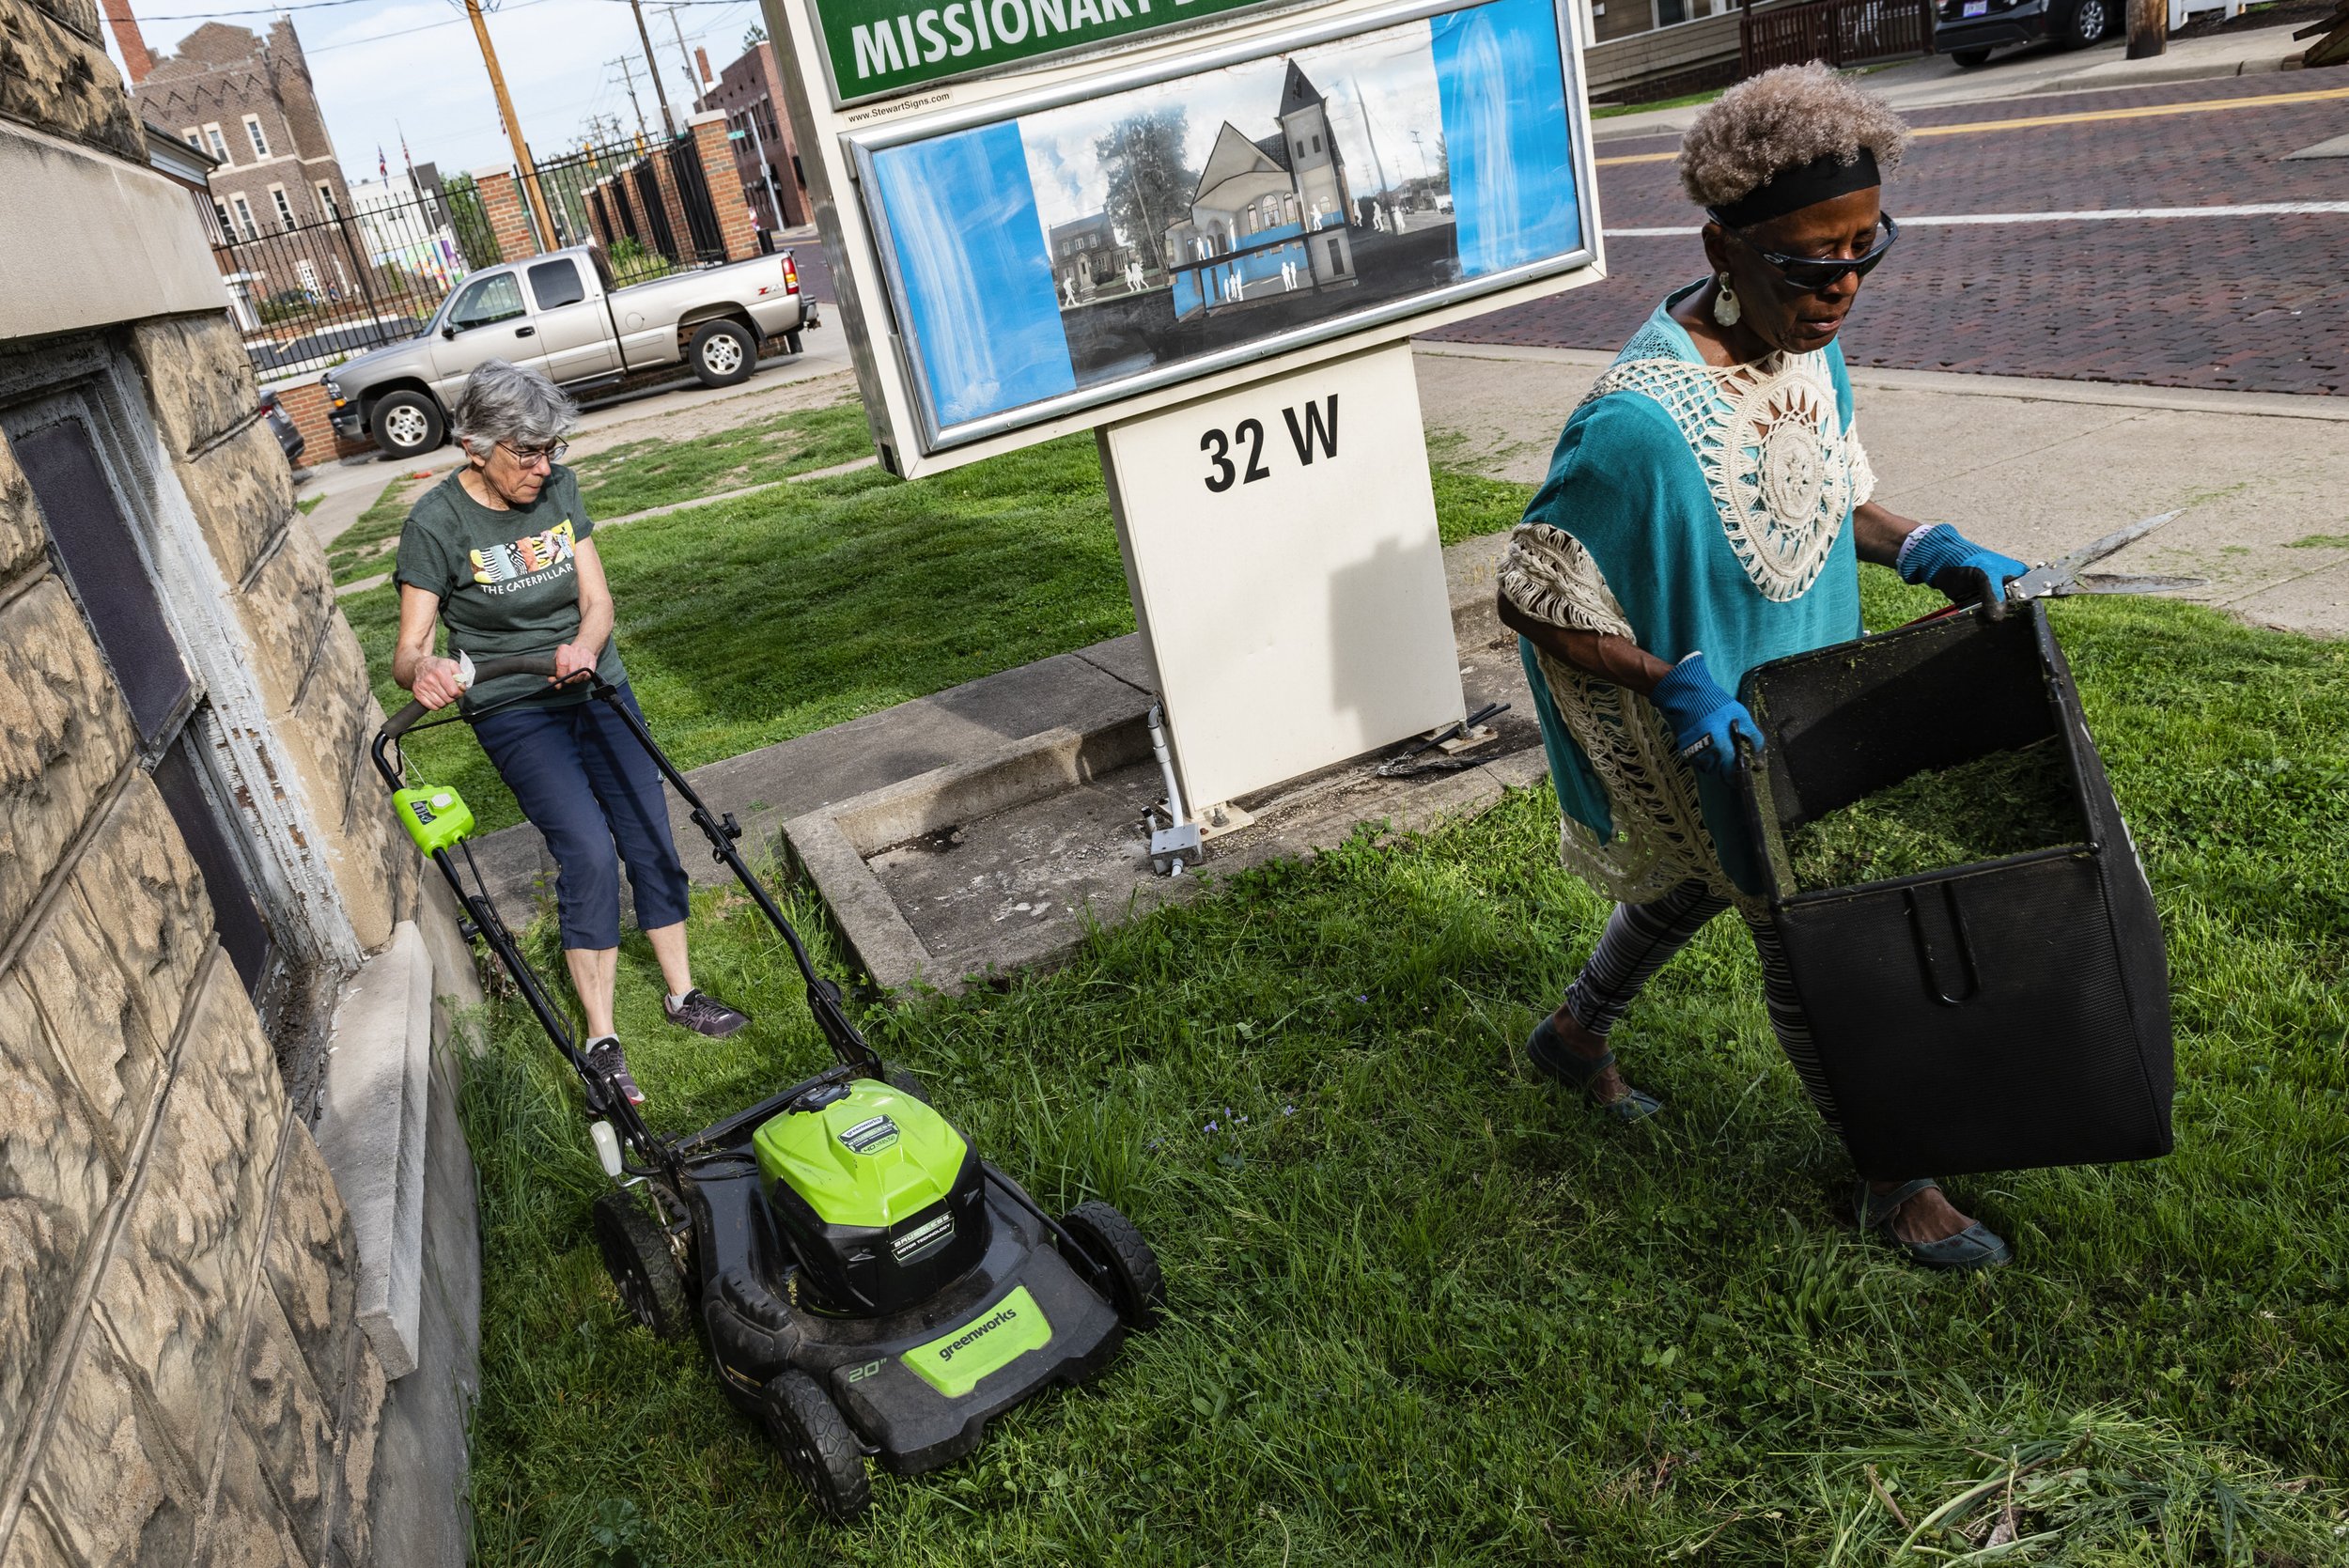  Dr. Tee Ford-Ahmed walks off with a container of weeds and grass while her friend and fellow Mount Zion Baptist Church Preservation Society member Dr. Susan Righi continues to mow the grass outside Mount Zion Baptist Church in Athens, Ohio, Thursday